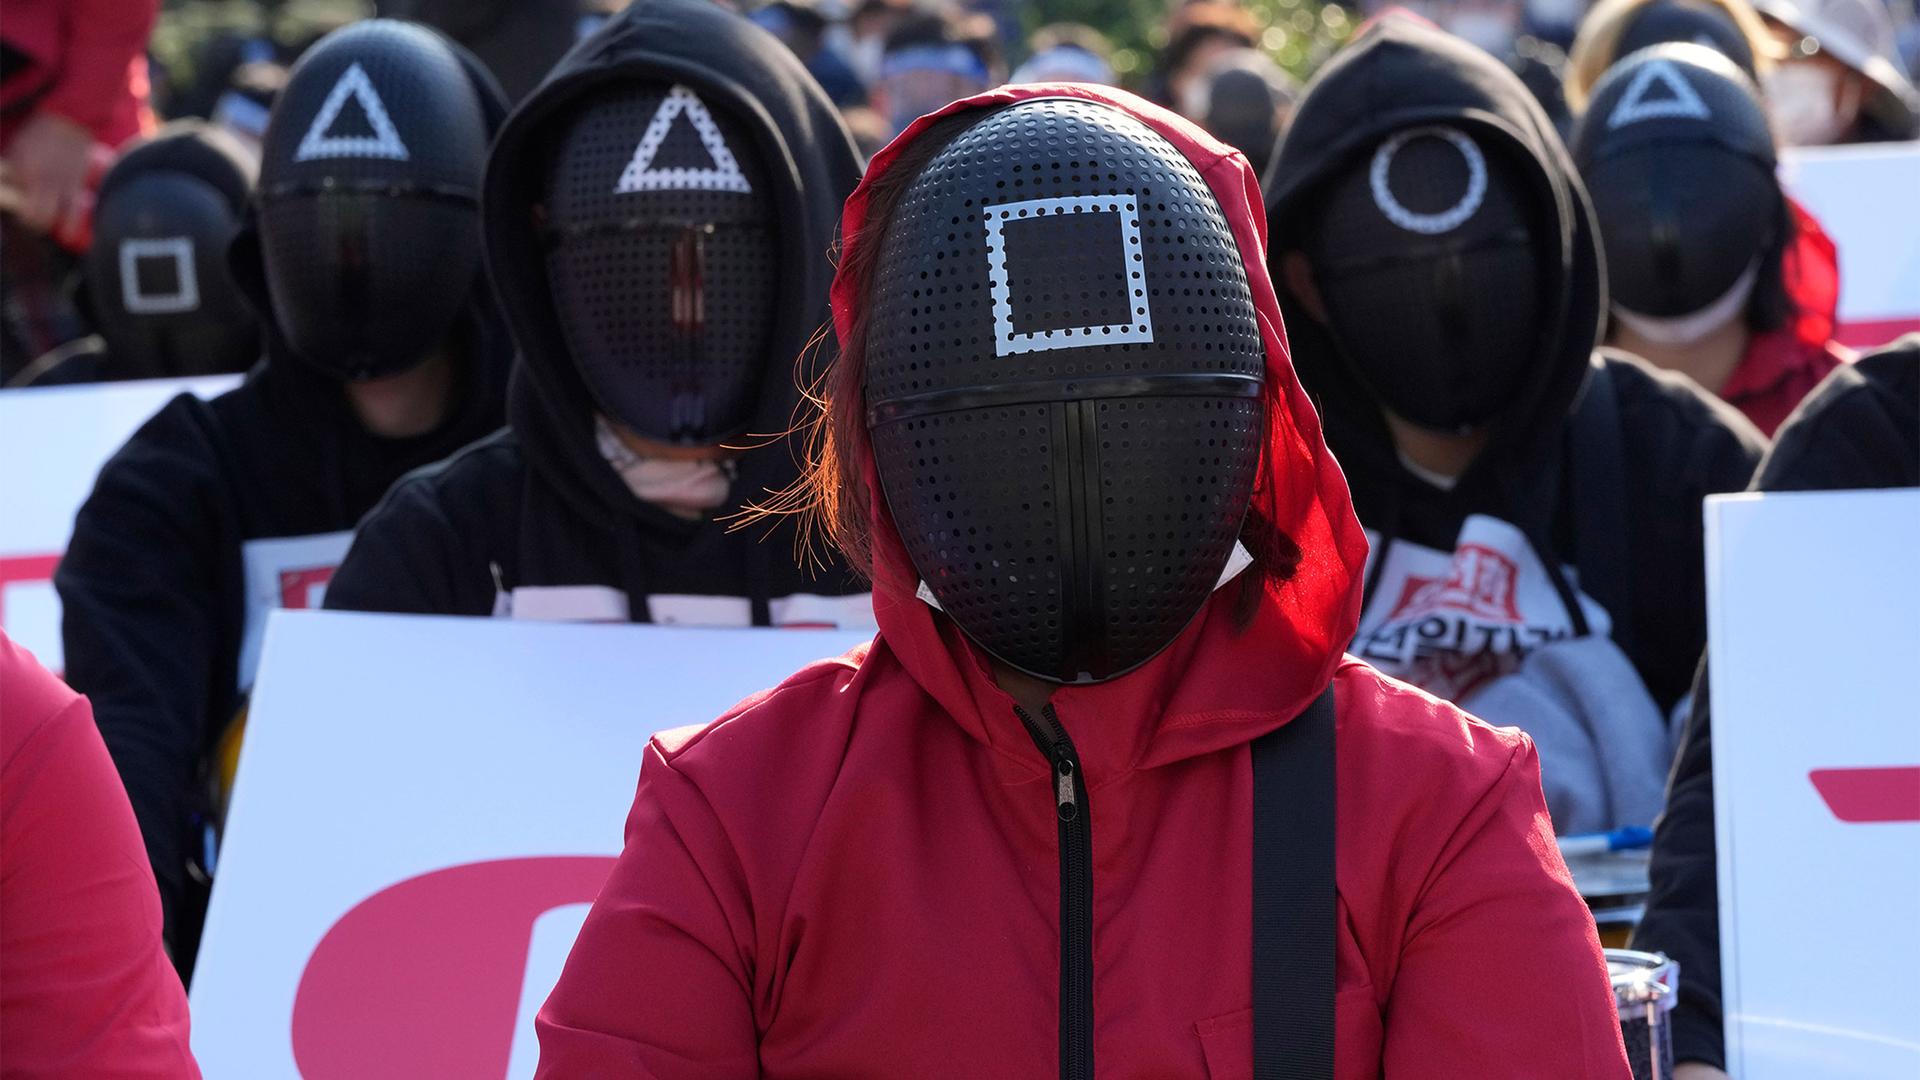 Members of the South Korean Confederation of Trade Unions wearing masks and costumes inspired by the Netflix original Korean series "Squid Game" attend a rally demanding job security in Seoul, South Korea